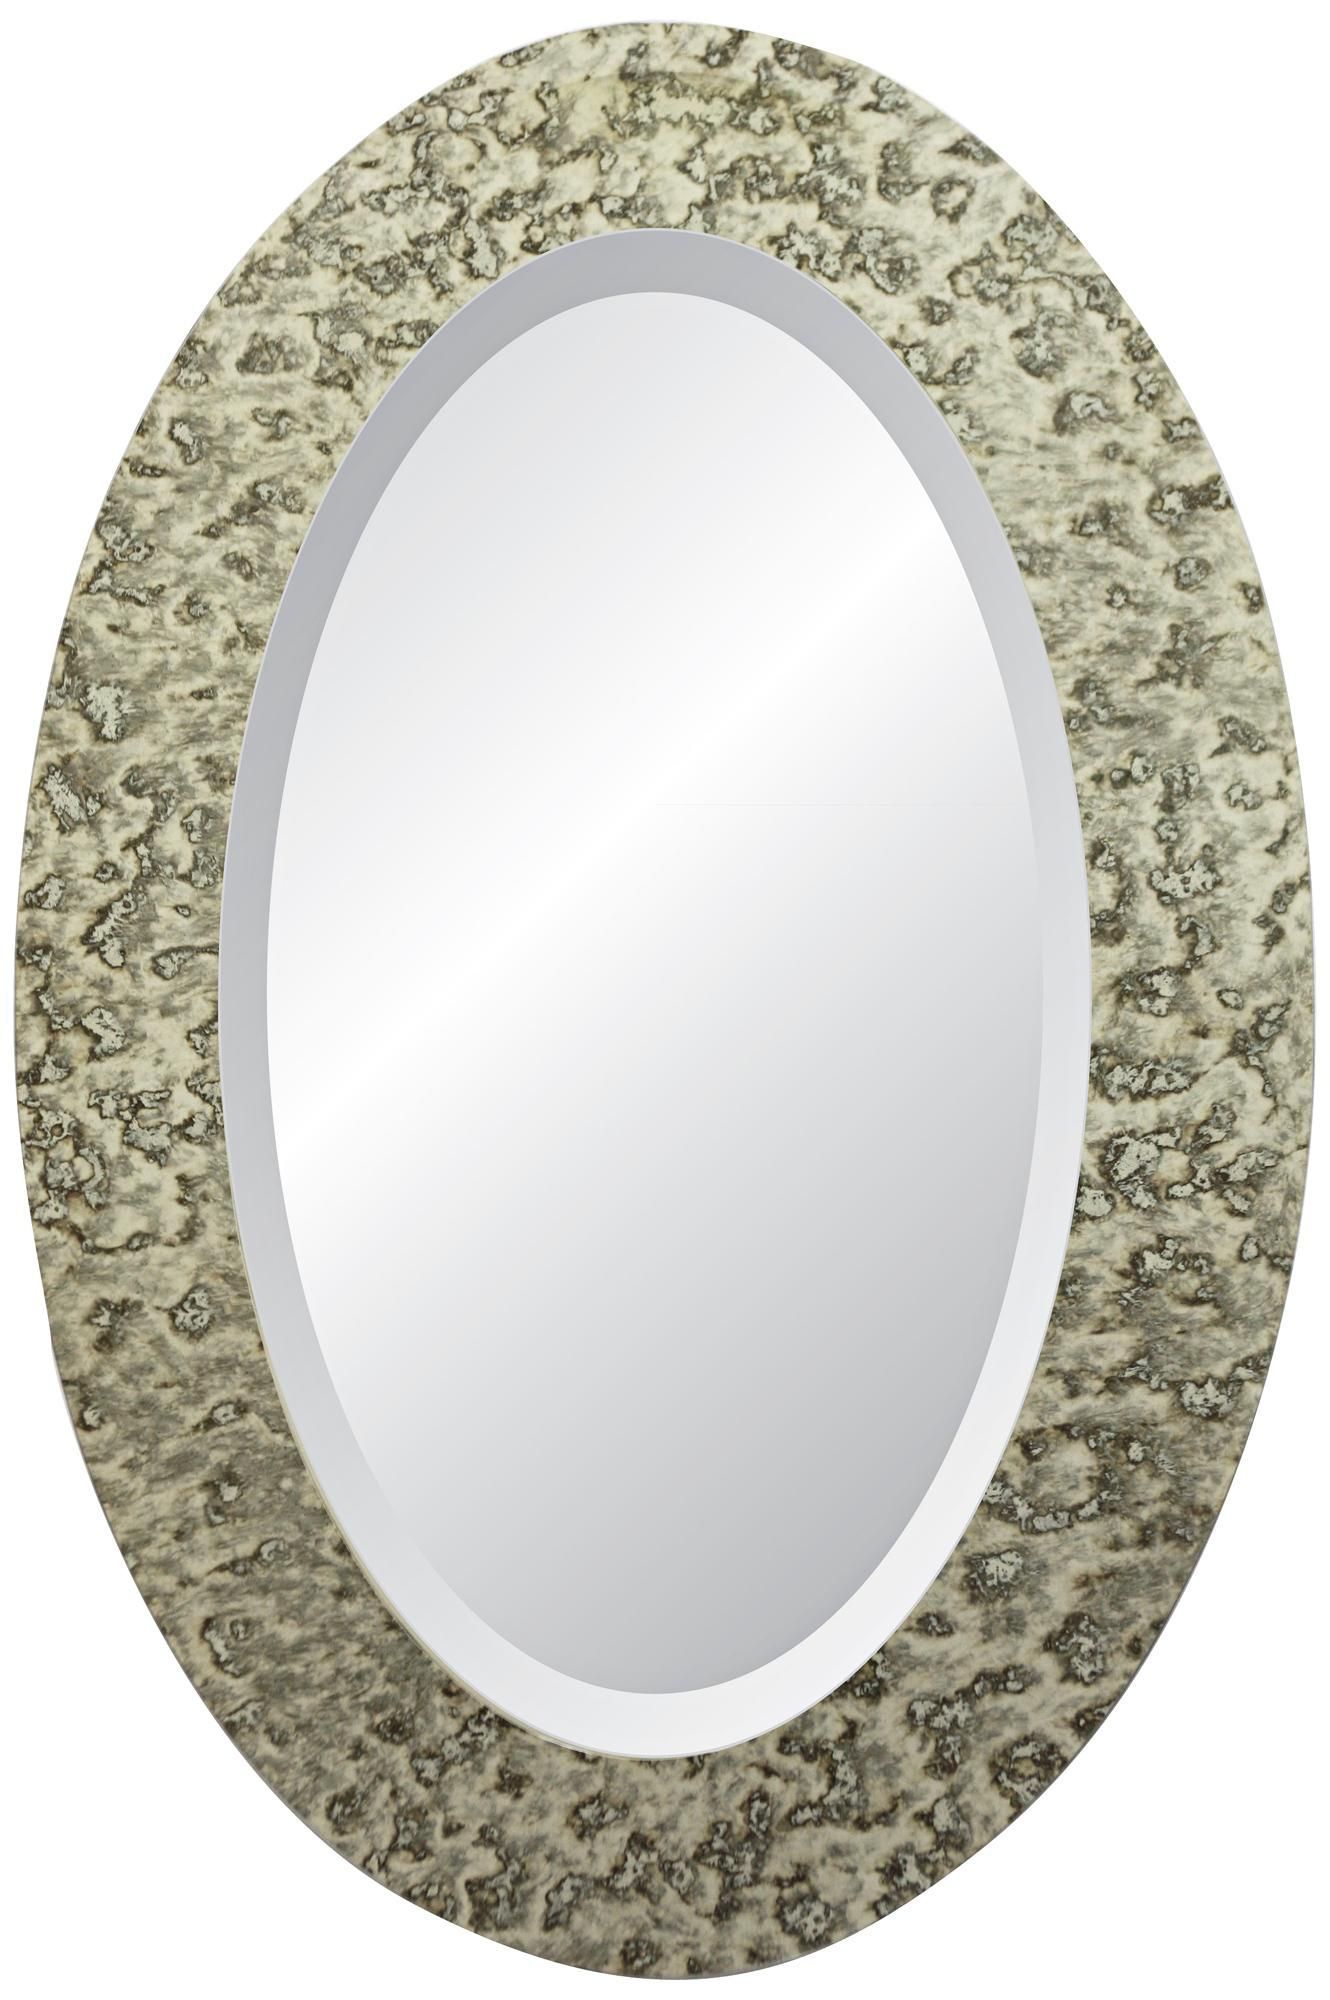 Dijon Signature 36" High Oval Wall Mirror – #x3060 | Lamps Plus | Oval Intended For Black Oval Cut Wall Mirrors (View 6 of 15)